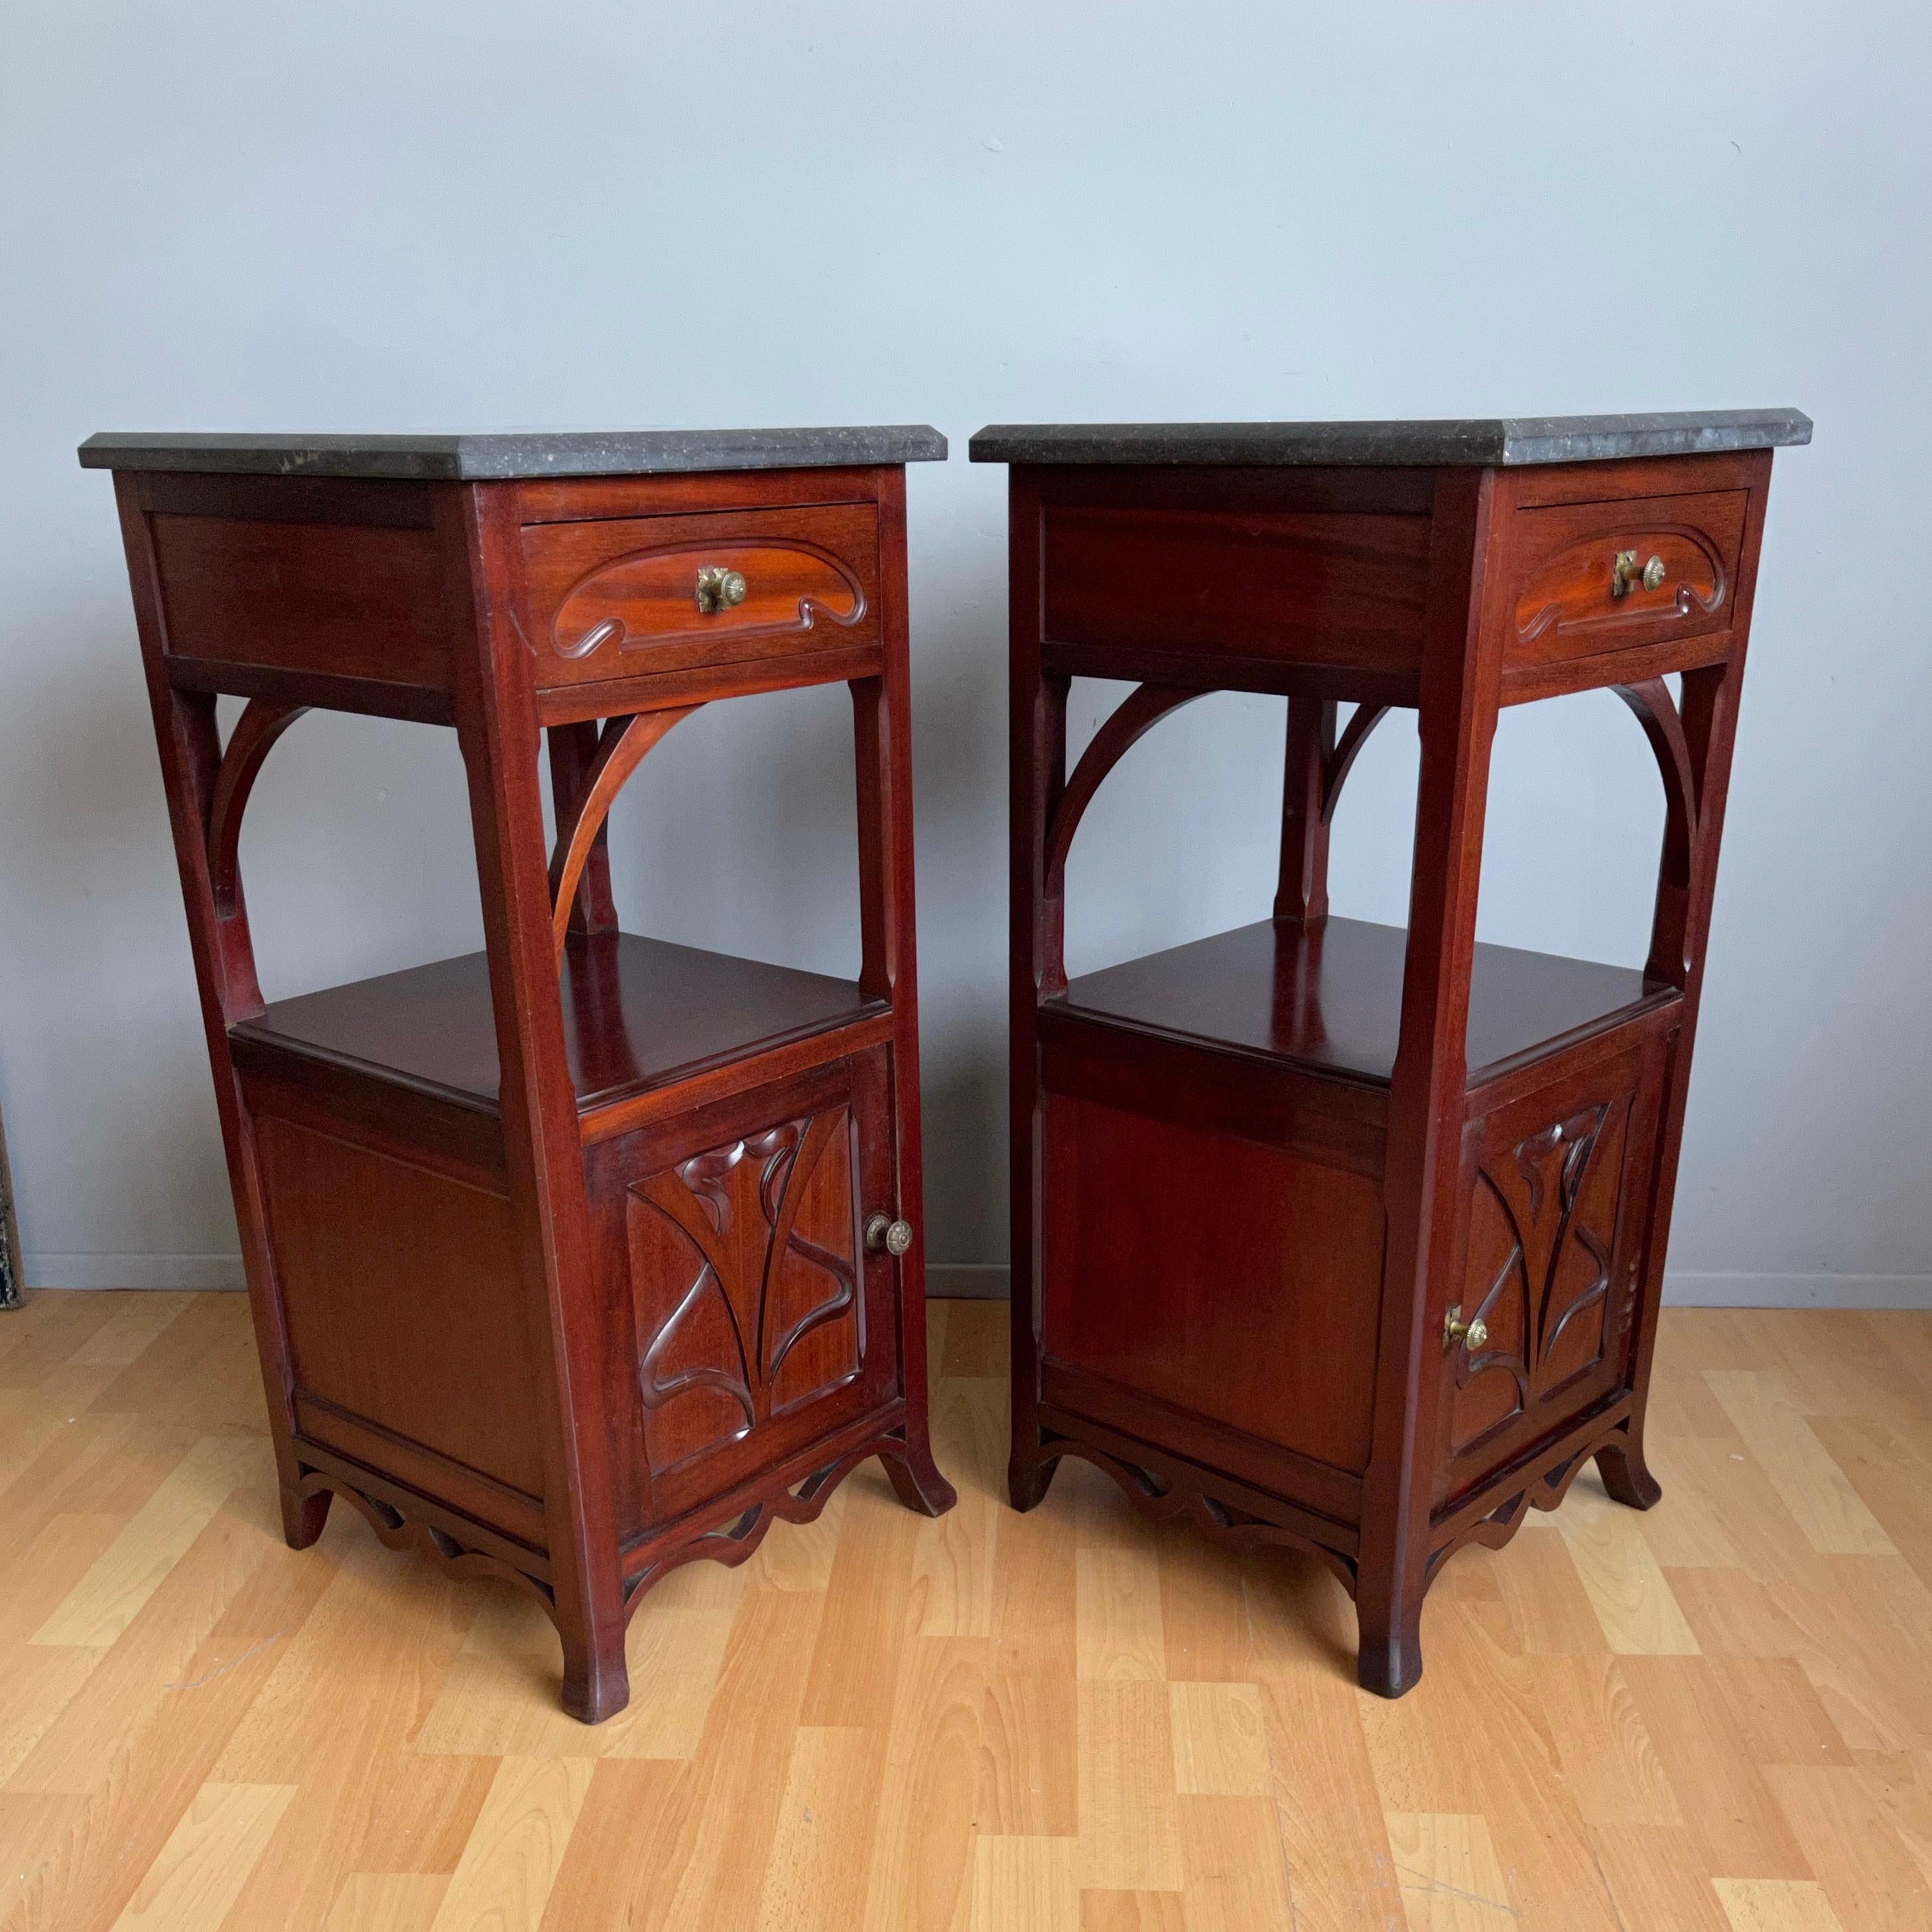 20th Century Pair of Solid Wooden Art Nouveau Bedside Cabinets / Nightstands with Marble Top